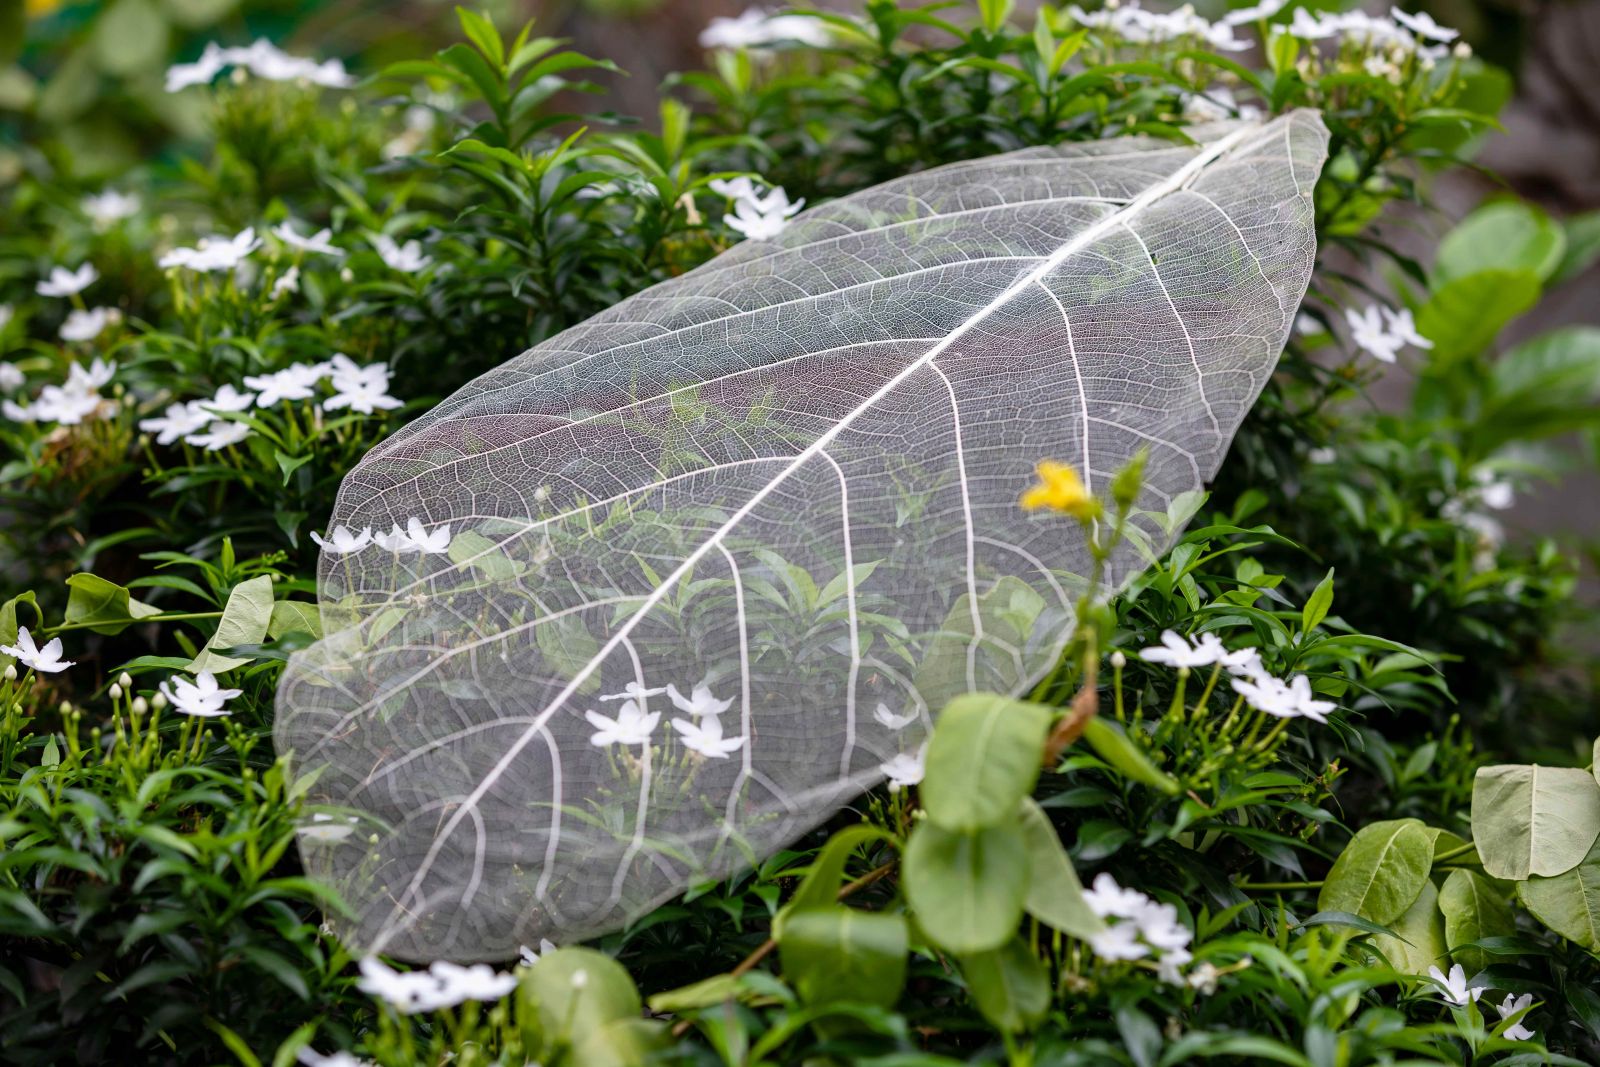 A leaf with a complete transparent venation can be made into beautiful conical hats.